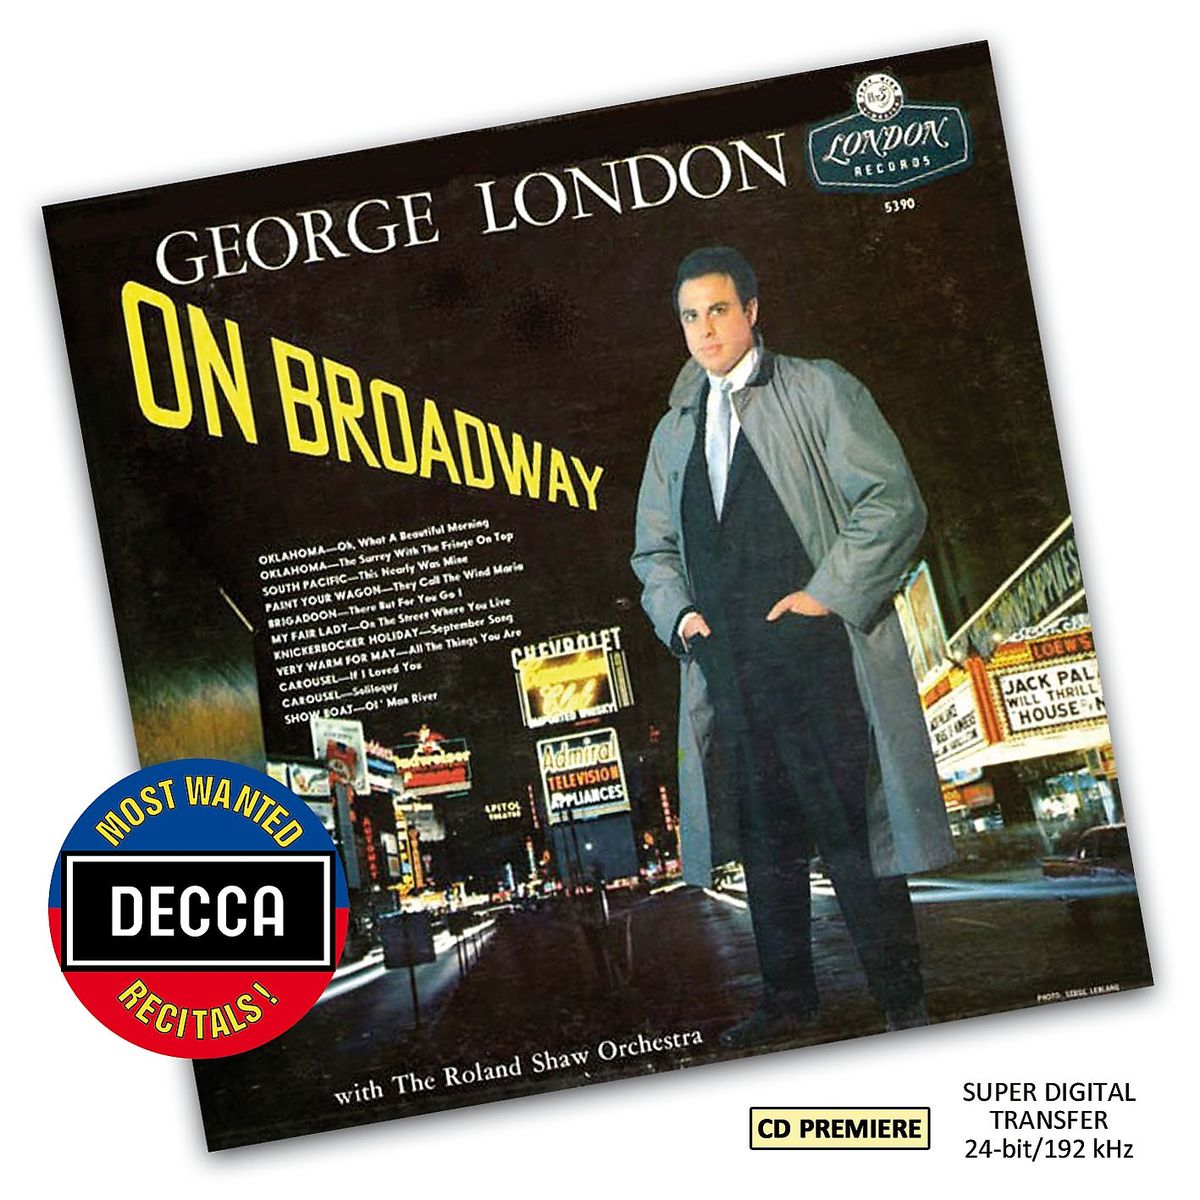 George London's "On Broadway" album in Decca's "Most Wanted" series. 